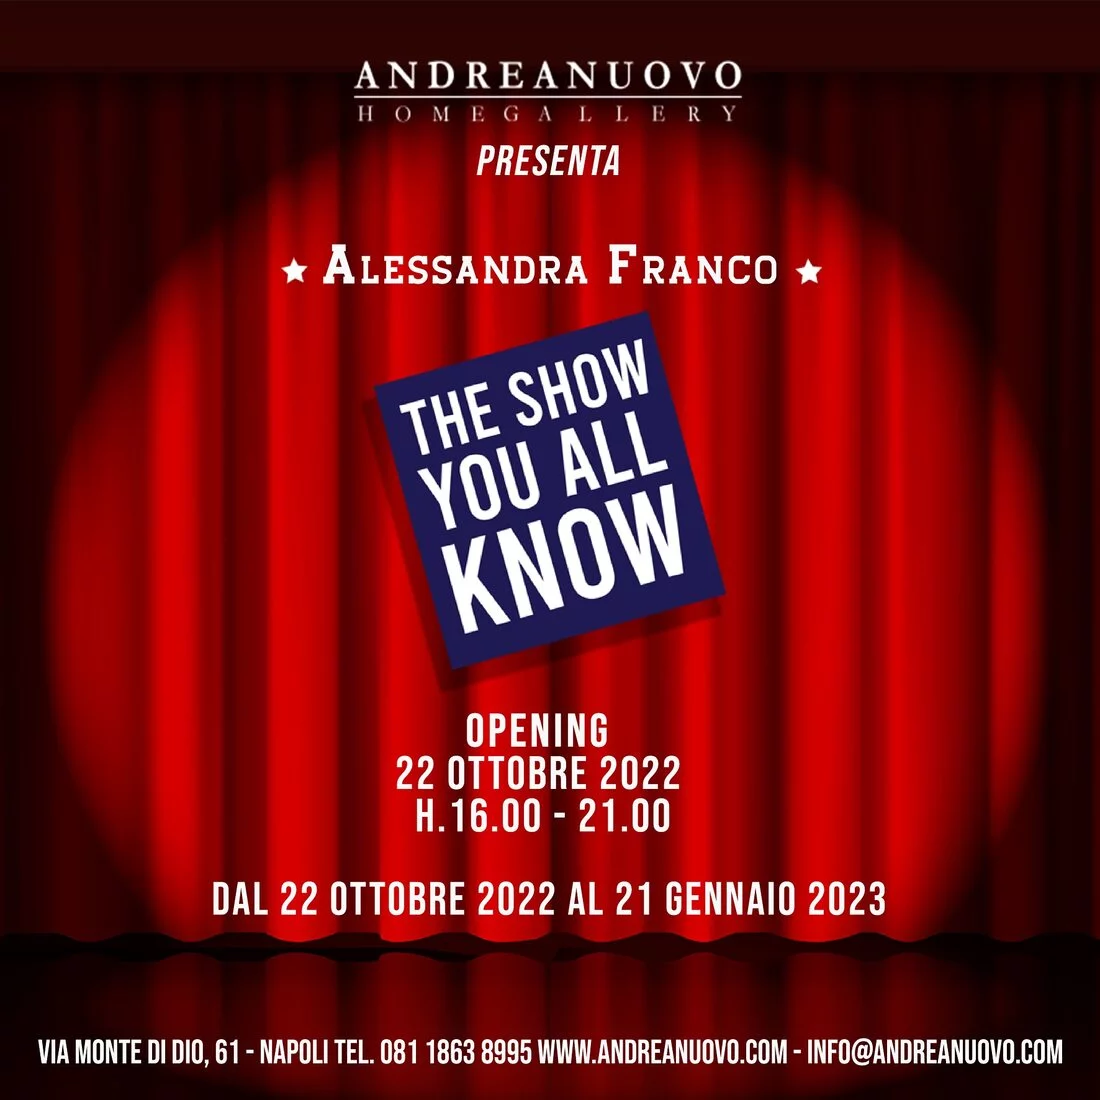 Alessandra Franco. The Show You All Know